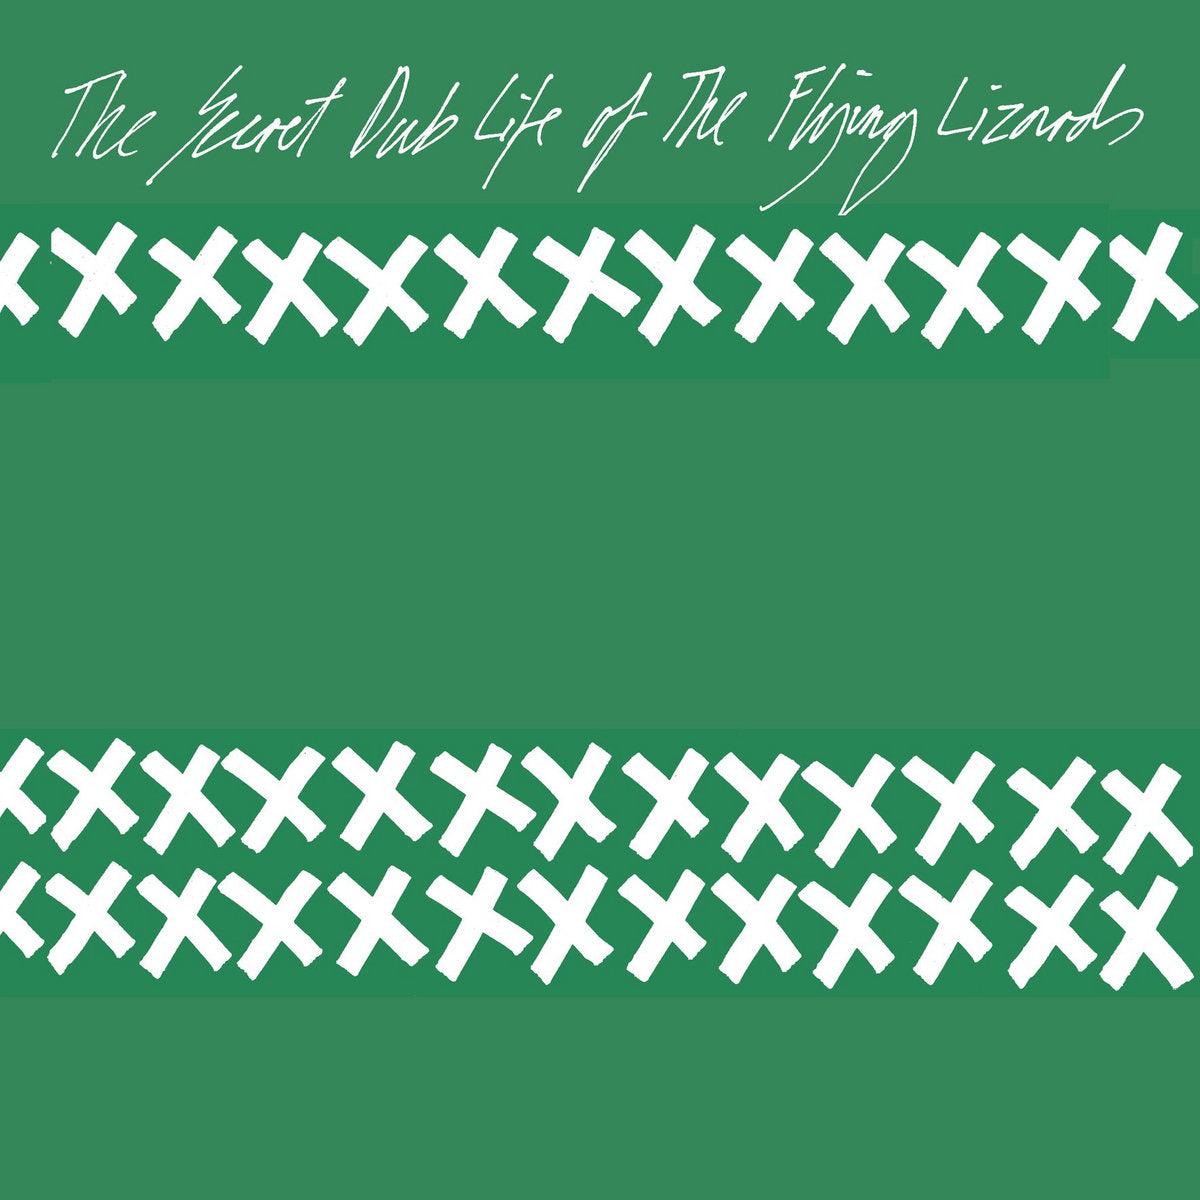 【LP】Flying Lizards - The Secret Dub Life of the Flying Lizards